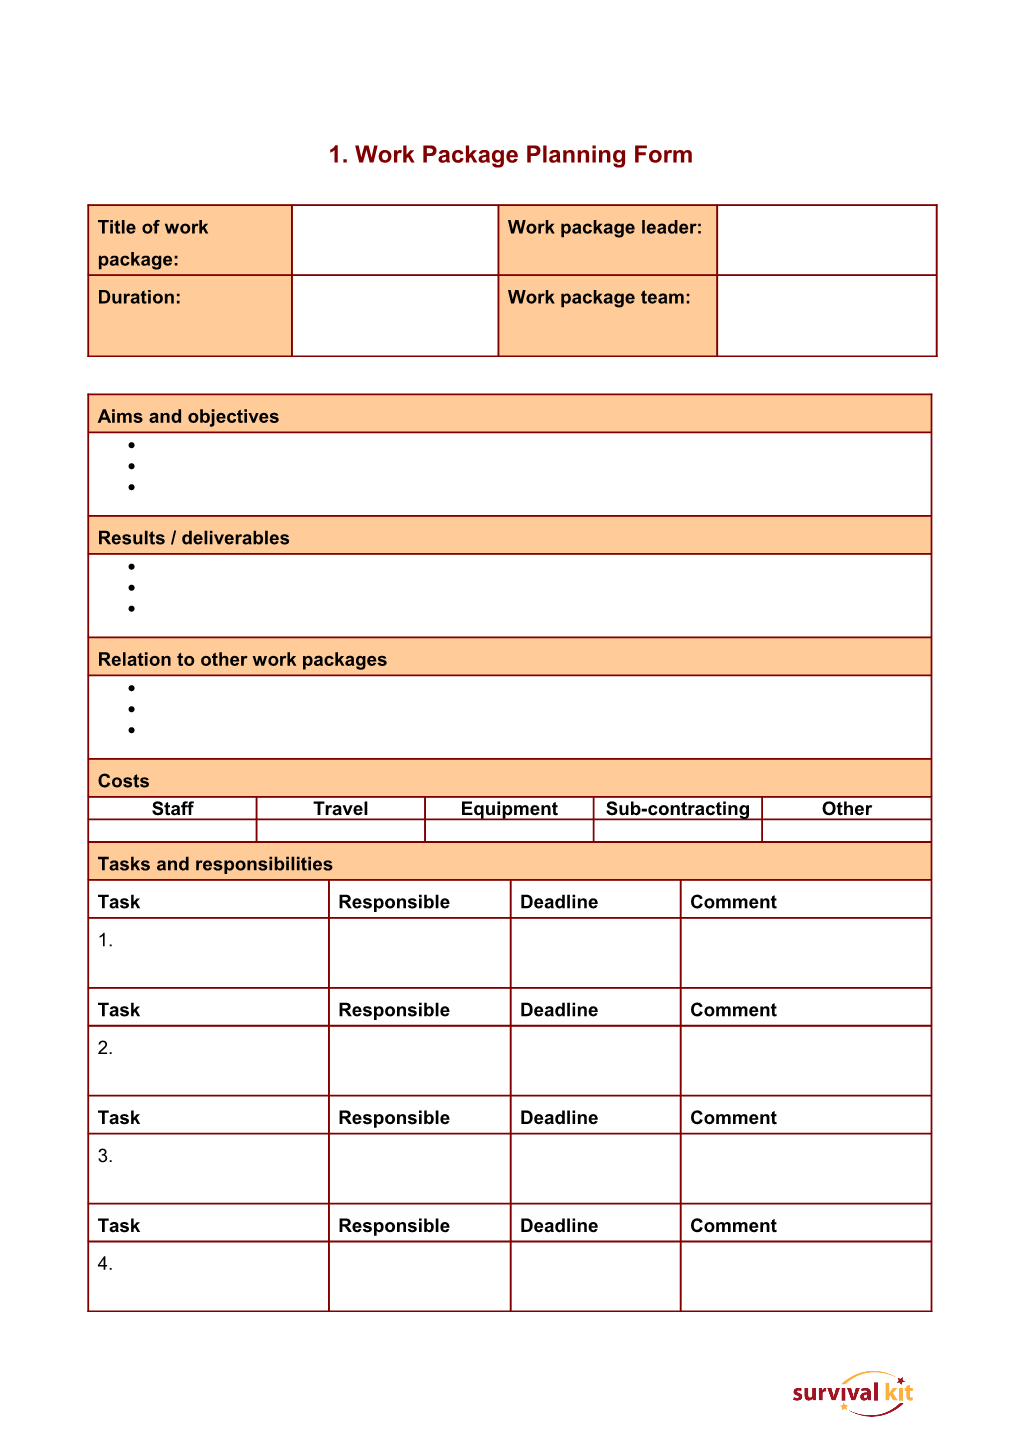 1. Work Package Planning Form